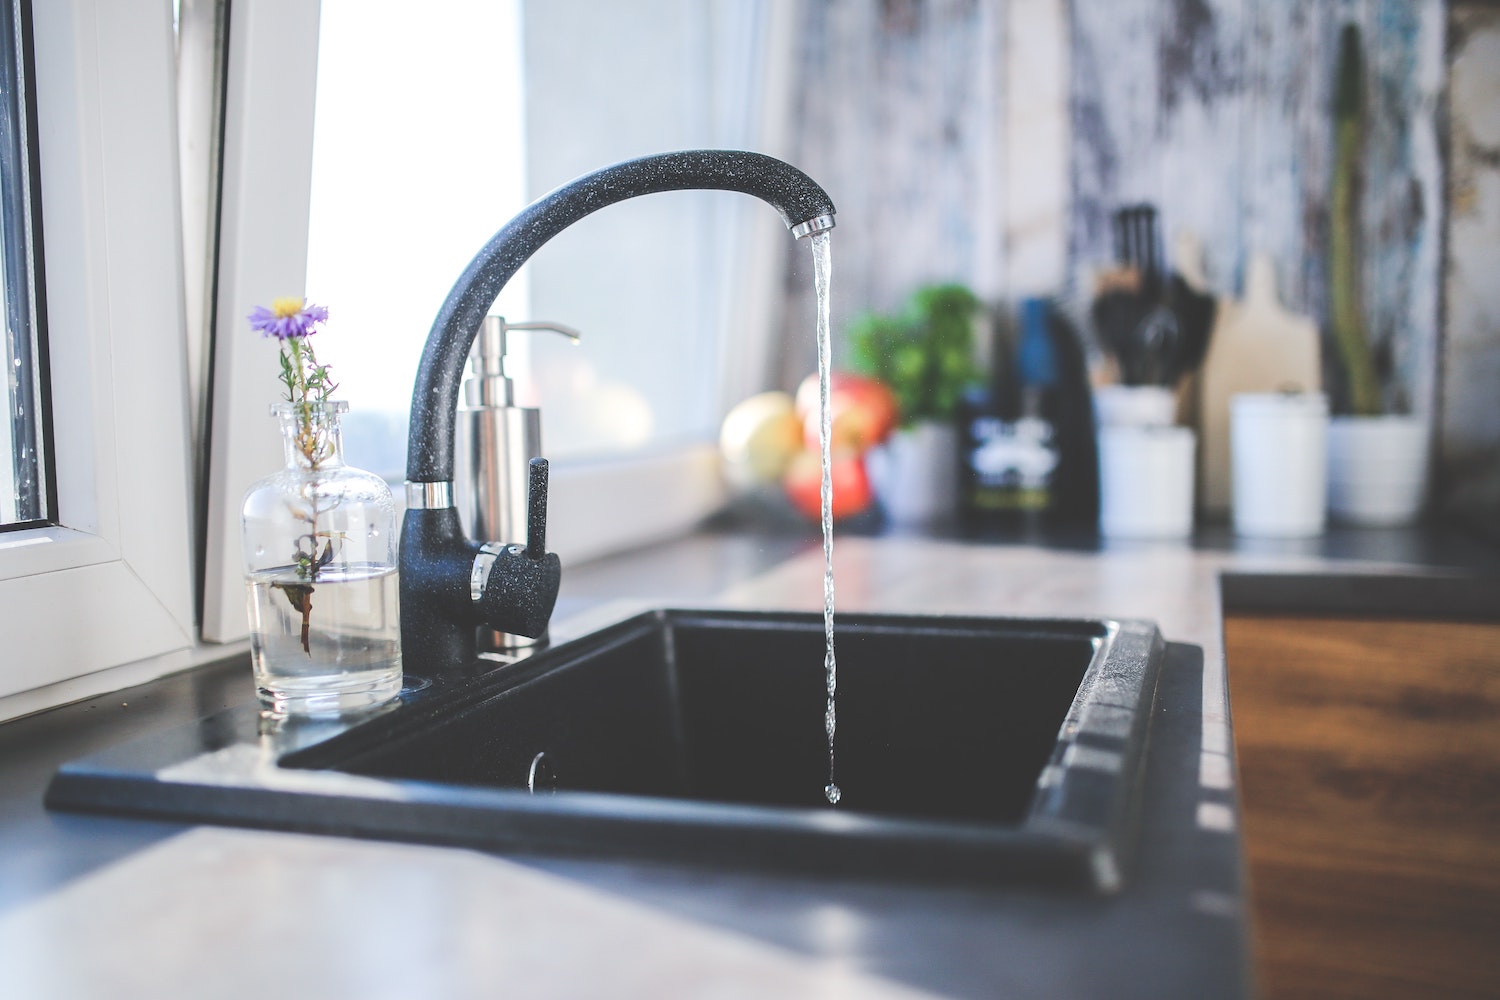 What Is The Best Material For A Kitchen Sink?